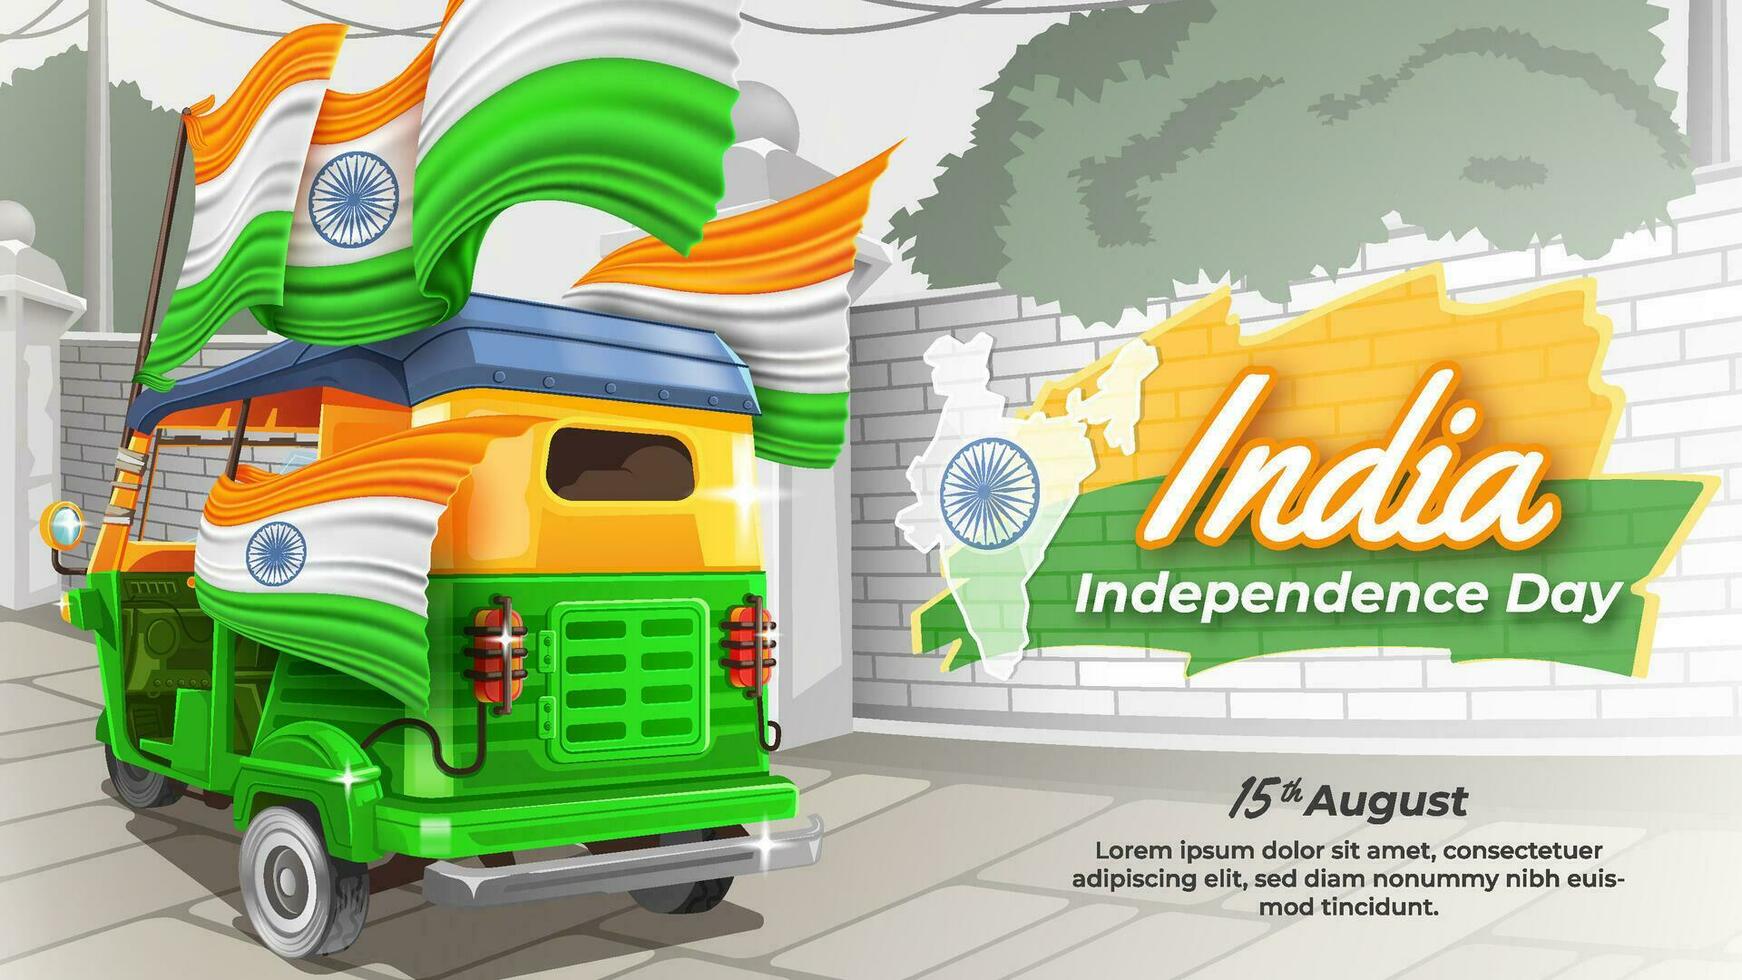 Auto Rickshaw and Indian Flag in India Independence Day Illustration vector